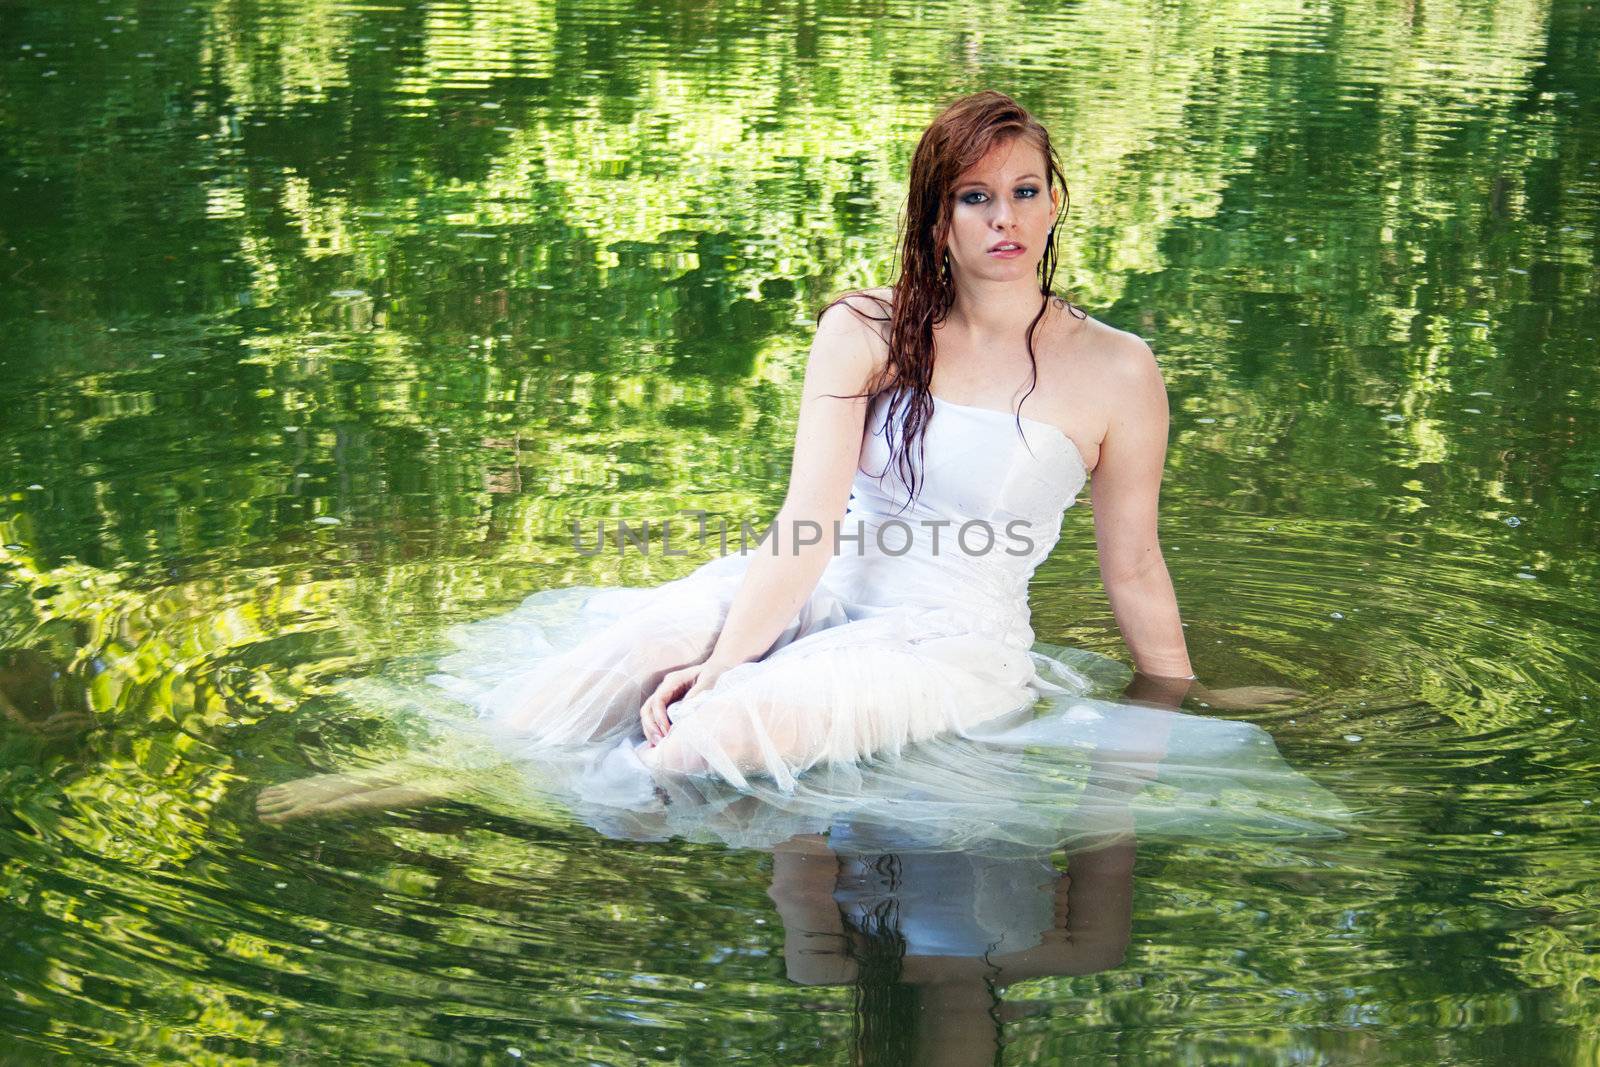 A woman appearing to float in green water